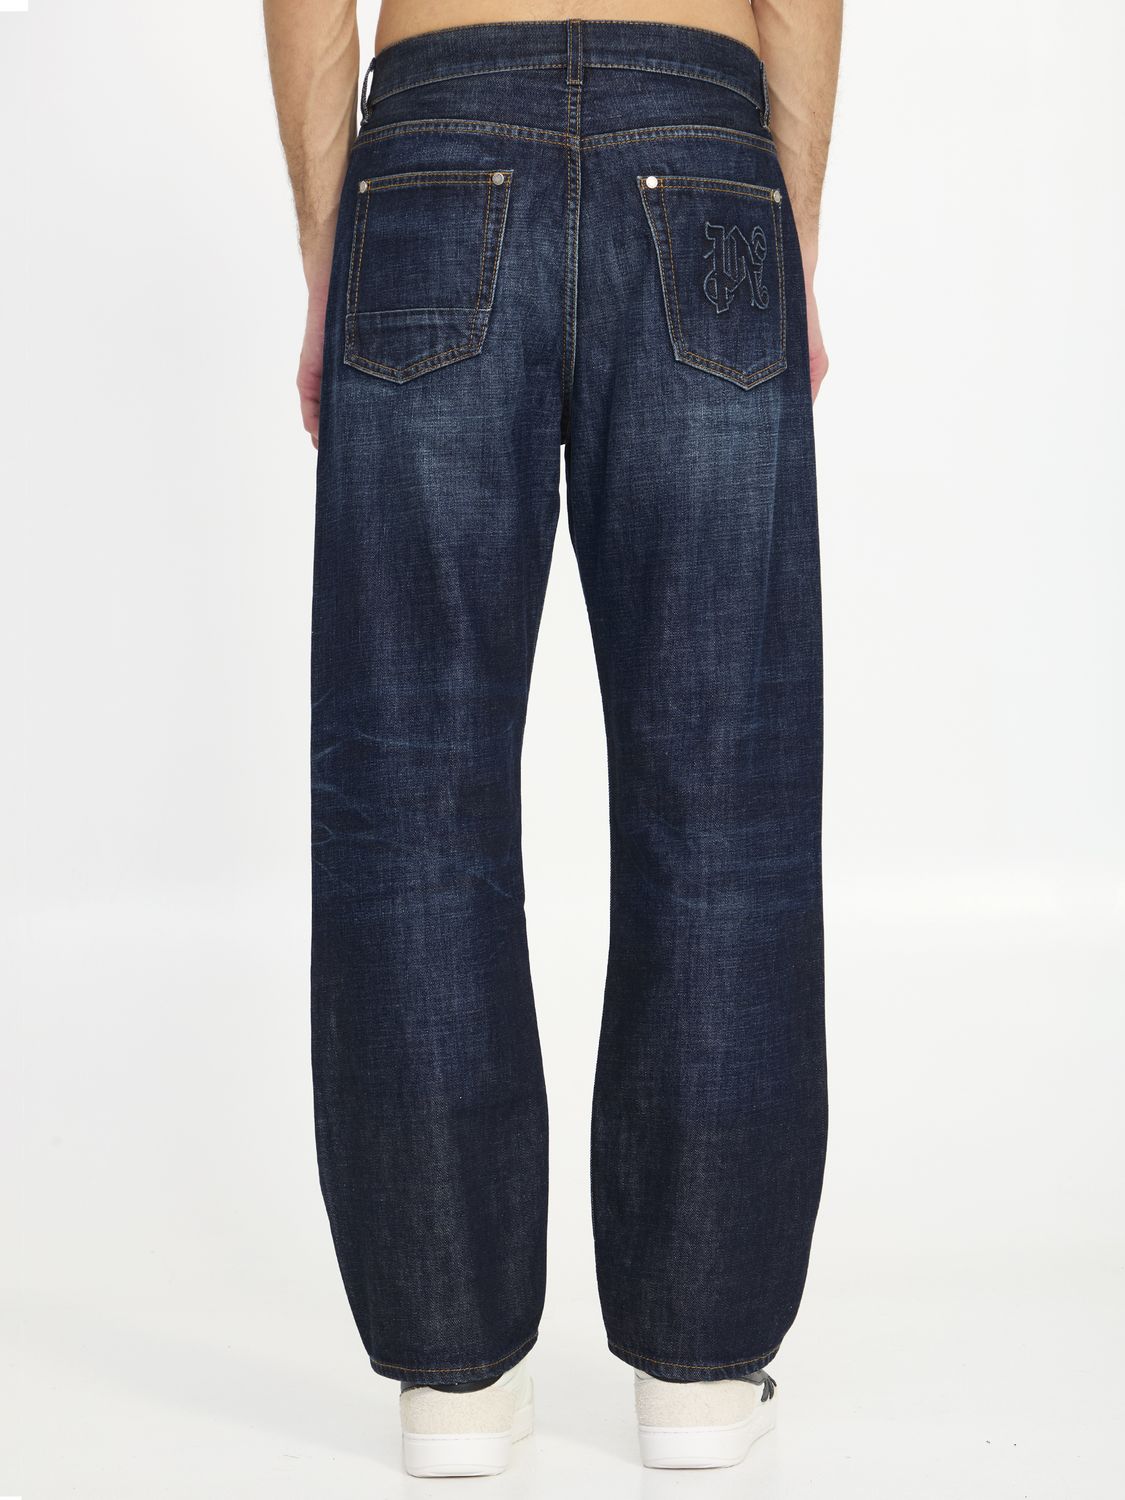 PALM ANGELS High-Waisted Monogram Jeans in Blue Cotton Denim for Men